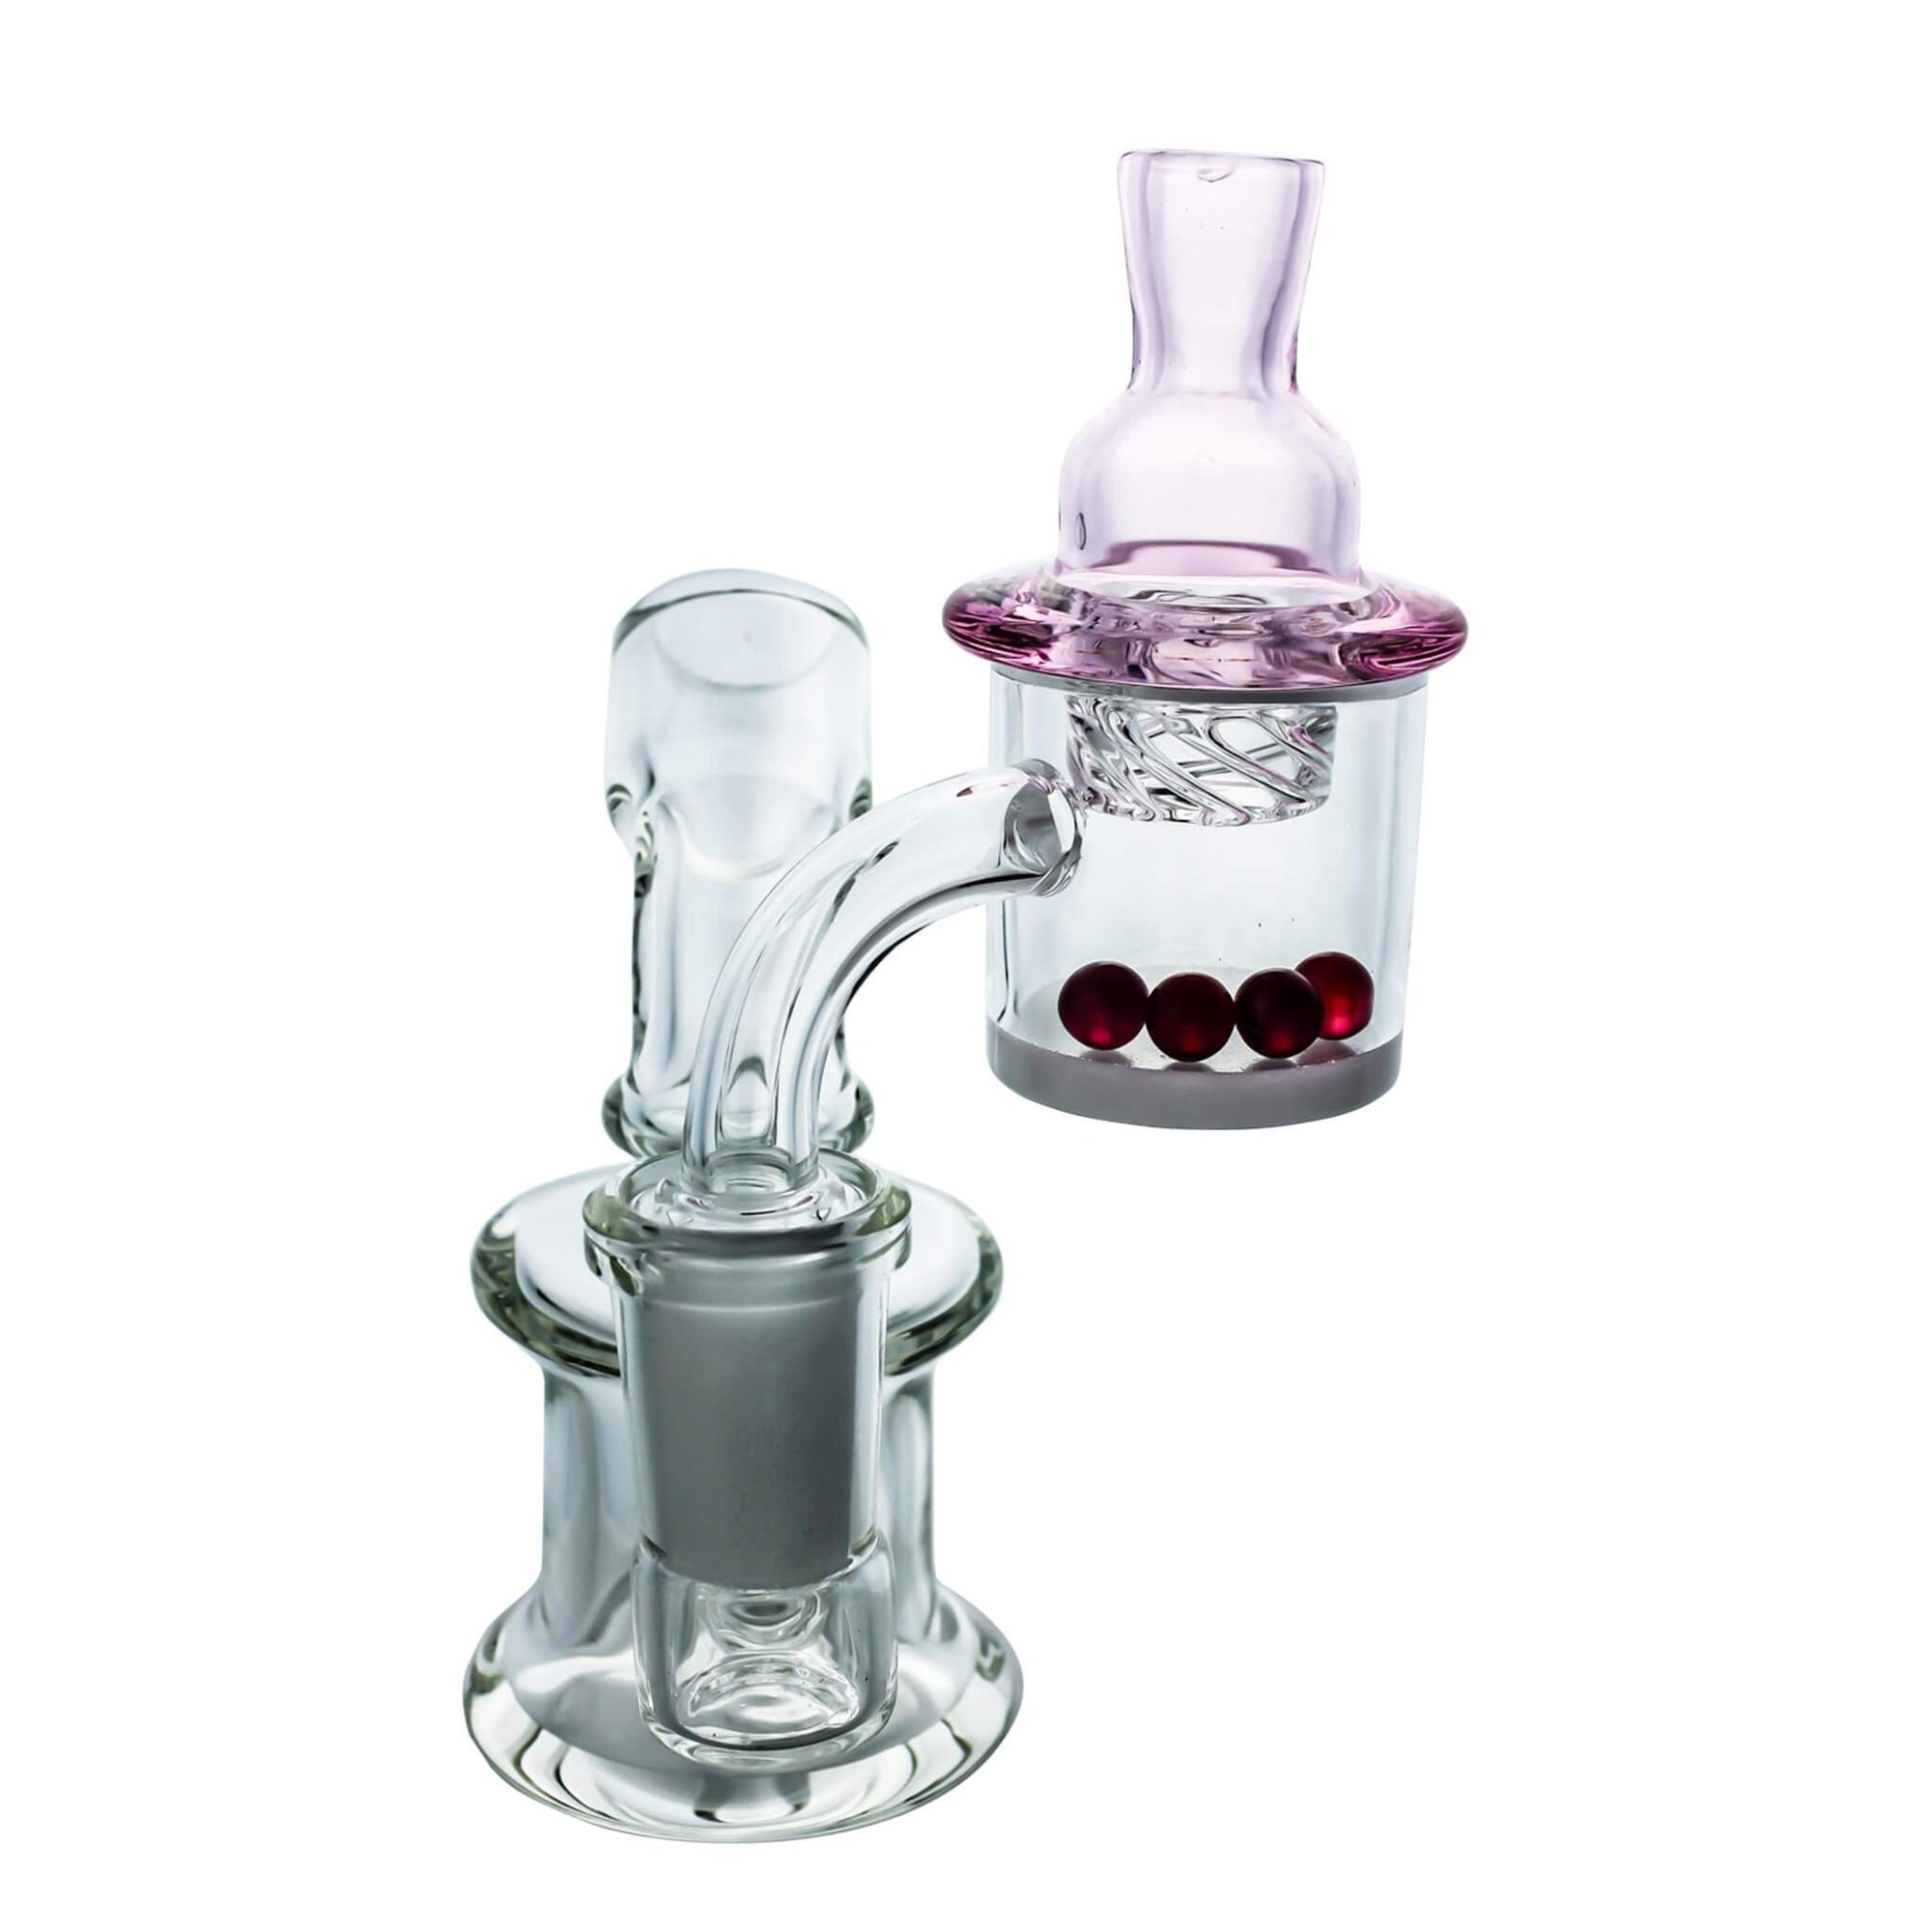 Tiny Hand Dab Rig Complete Kit #6 | Pink Carb Cap Ruby Pearls View | the dabbing specialists